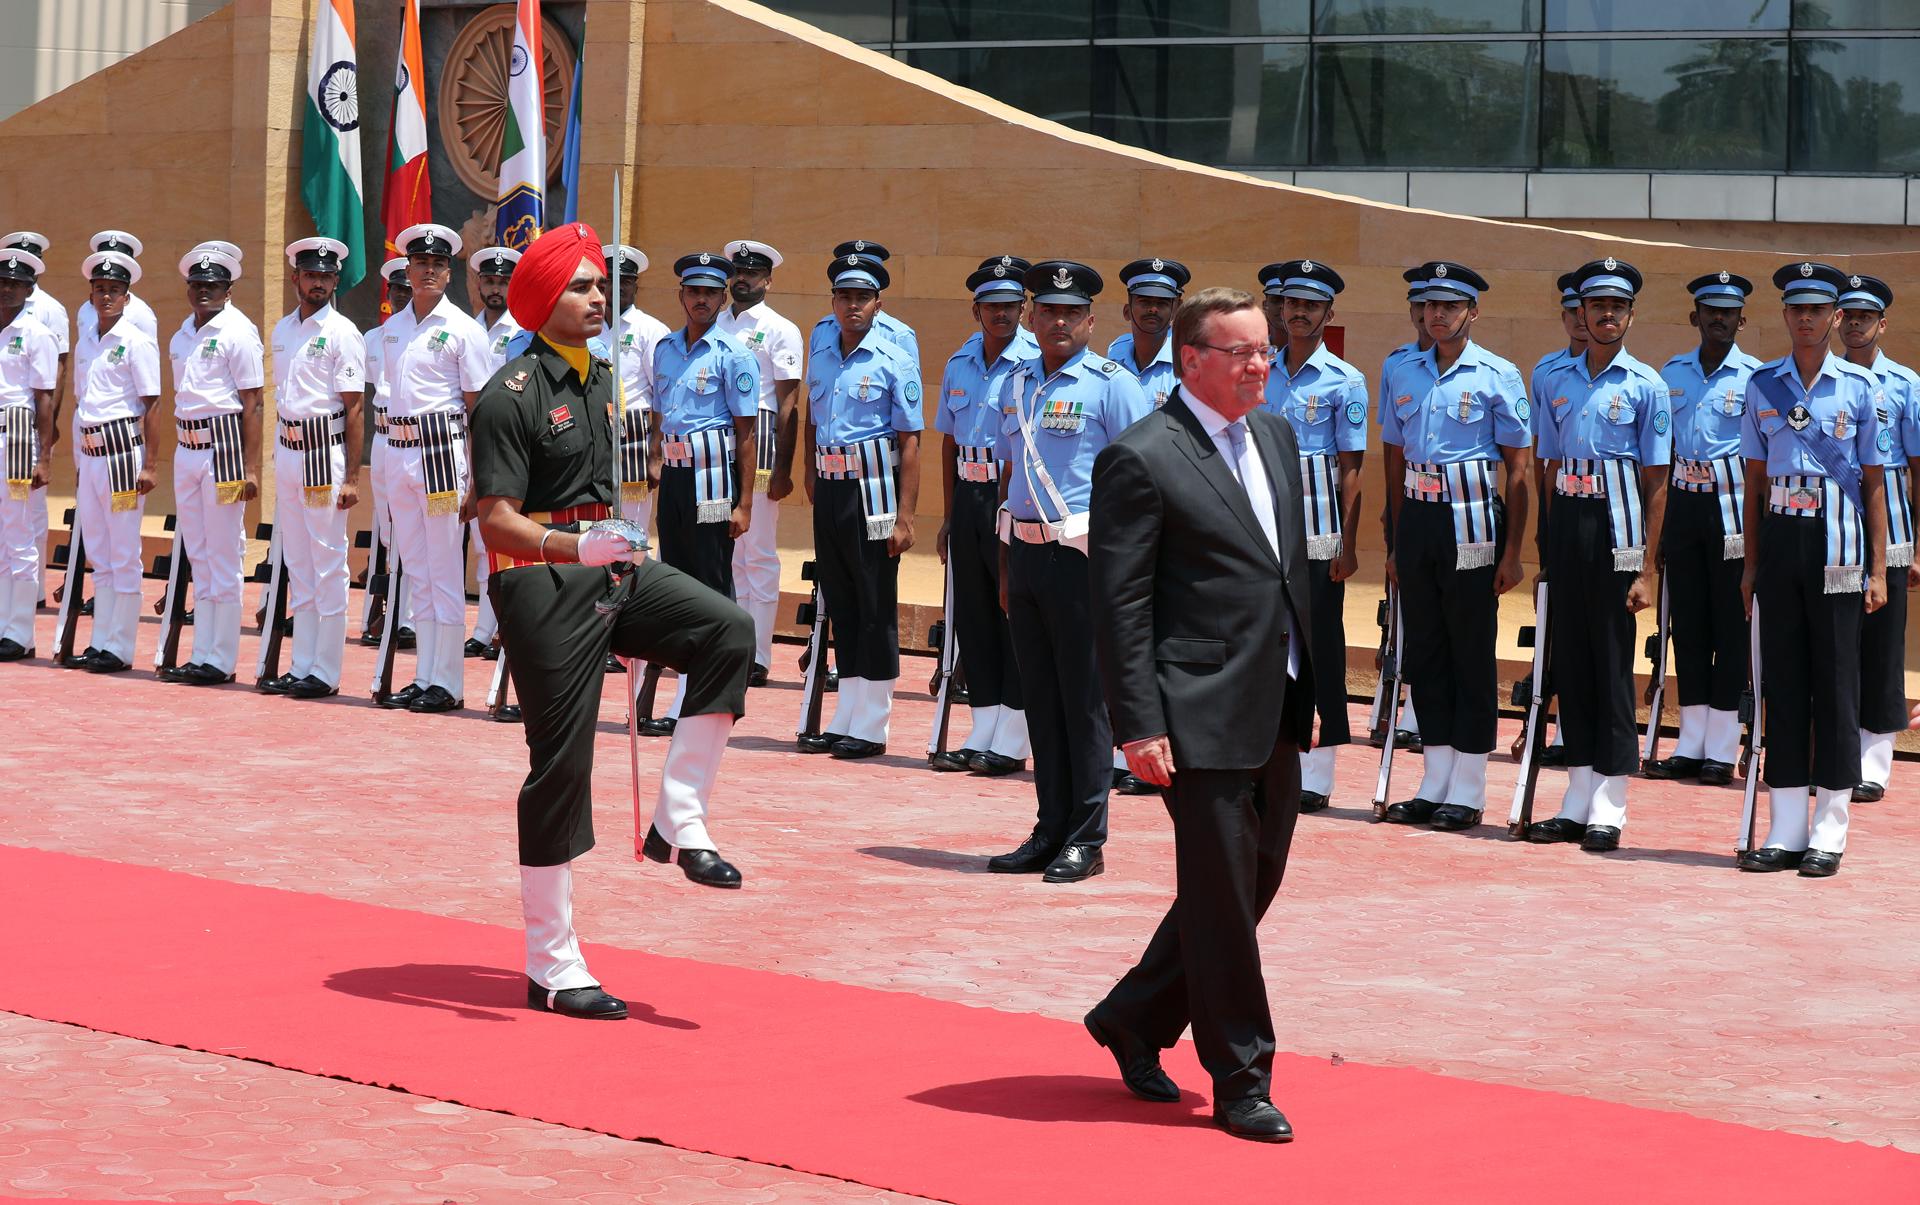 German Federal Minister of Defence Boris Pistorius inspects the Guard of Honour during a welcome ceremony at Manekshaw Centre, Delhi Cantt, New Delhi, India, 06 June 2023. EFE-EPA/RAJAT GUPTA
